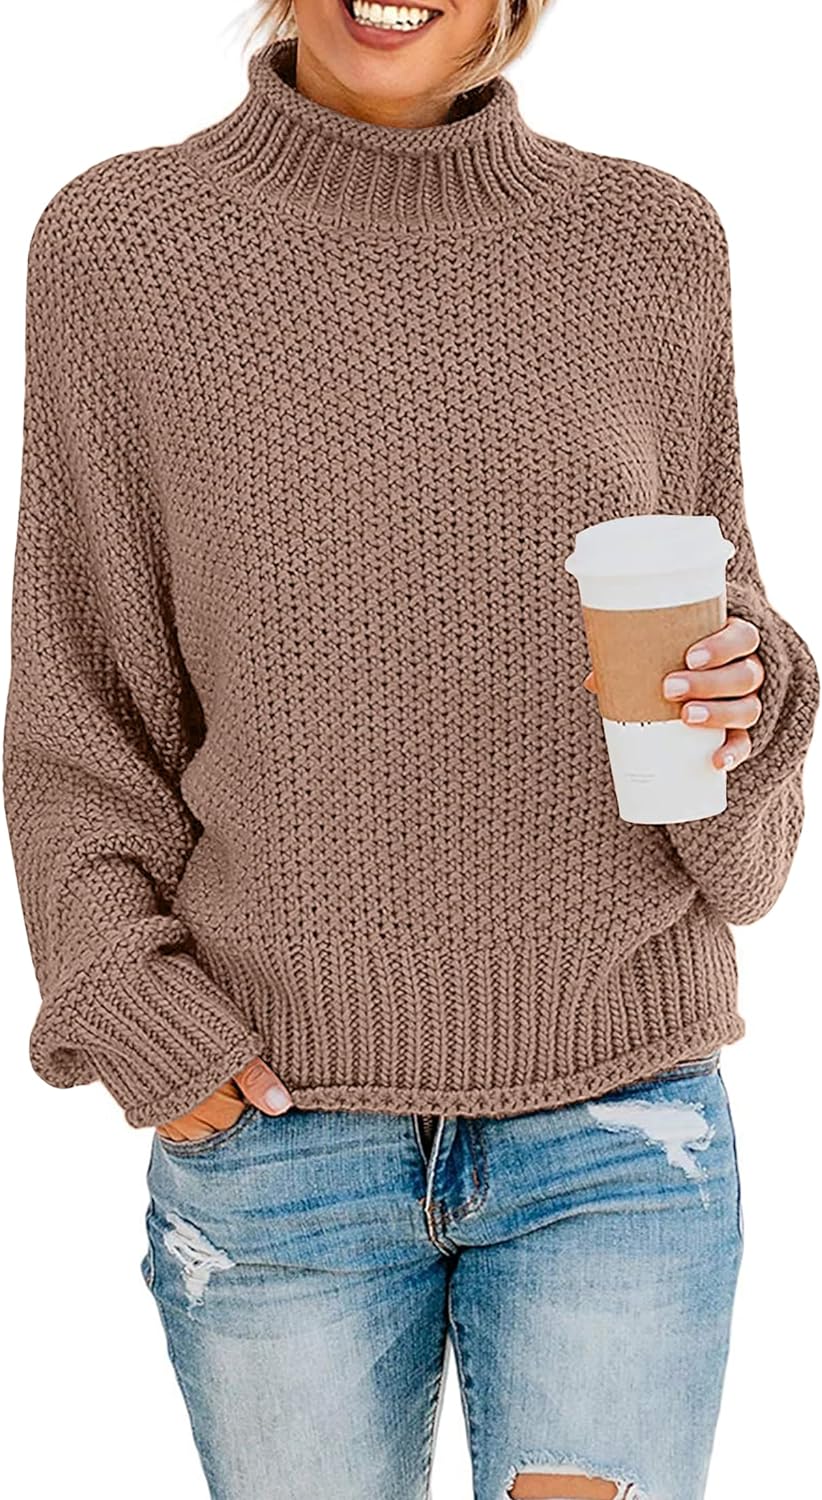 2023 Women's Turtleneck Batwing Sleeve Loose Oversized Chunky Knitted Pullover Sweater Jumper Tops